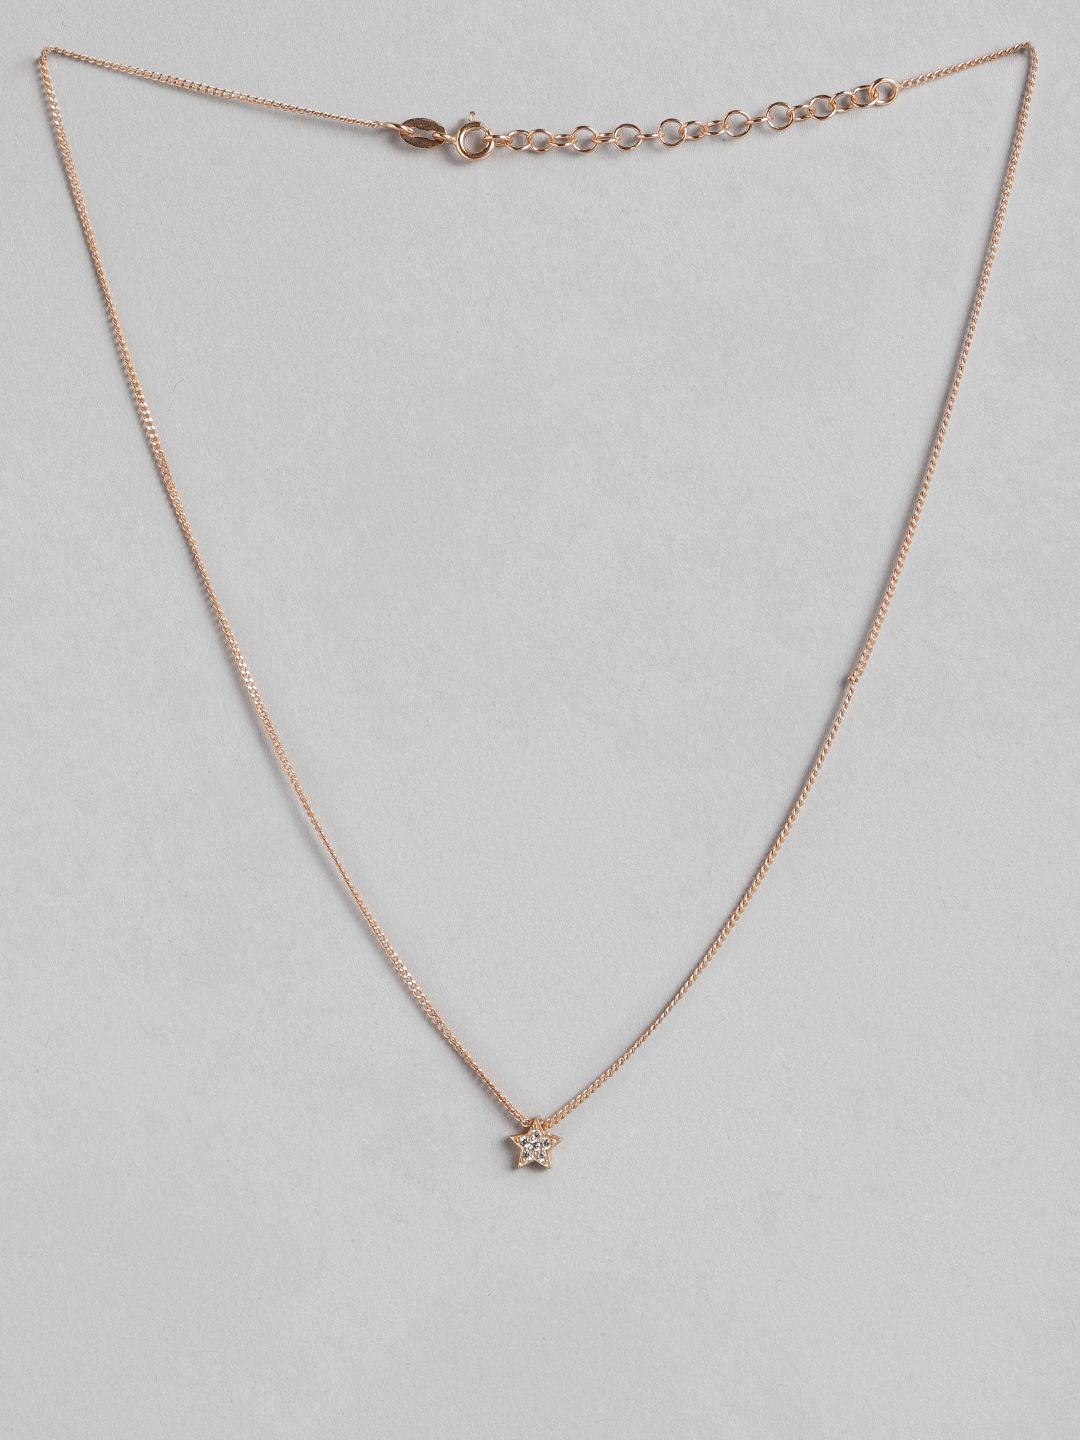 Carlton London Rose Gold-Plated Brass Necklace Price in India